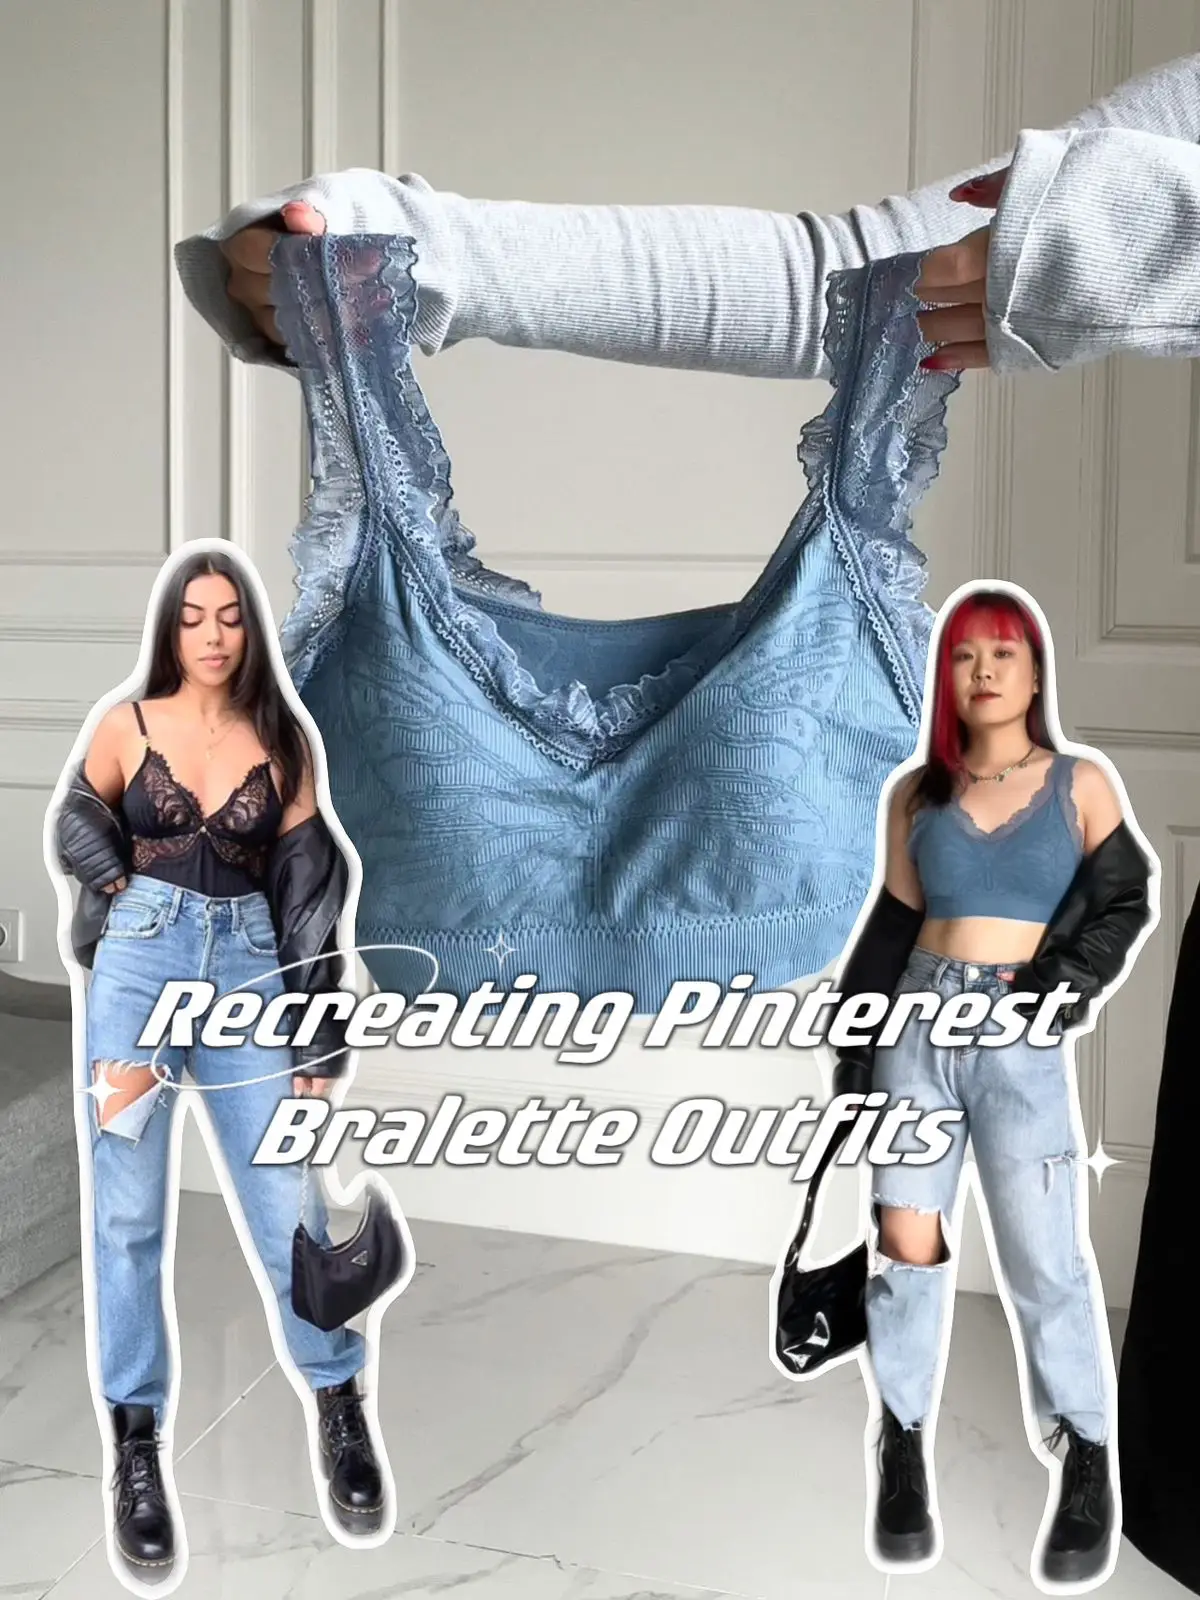 Recreating Pinterest Outfits Wearing Bralette!